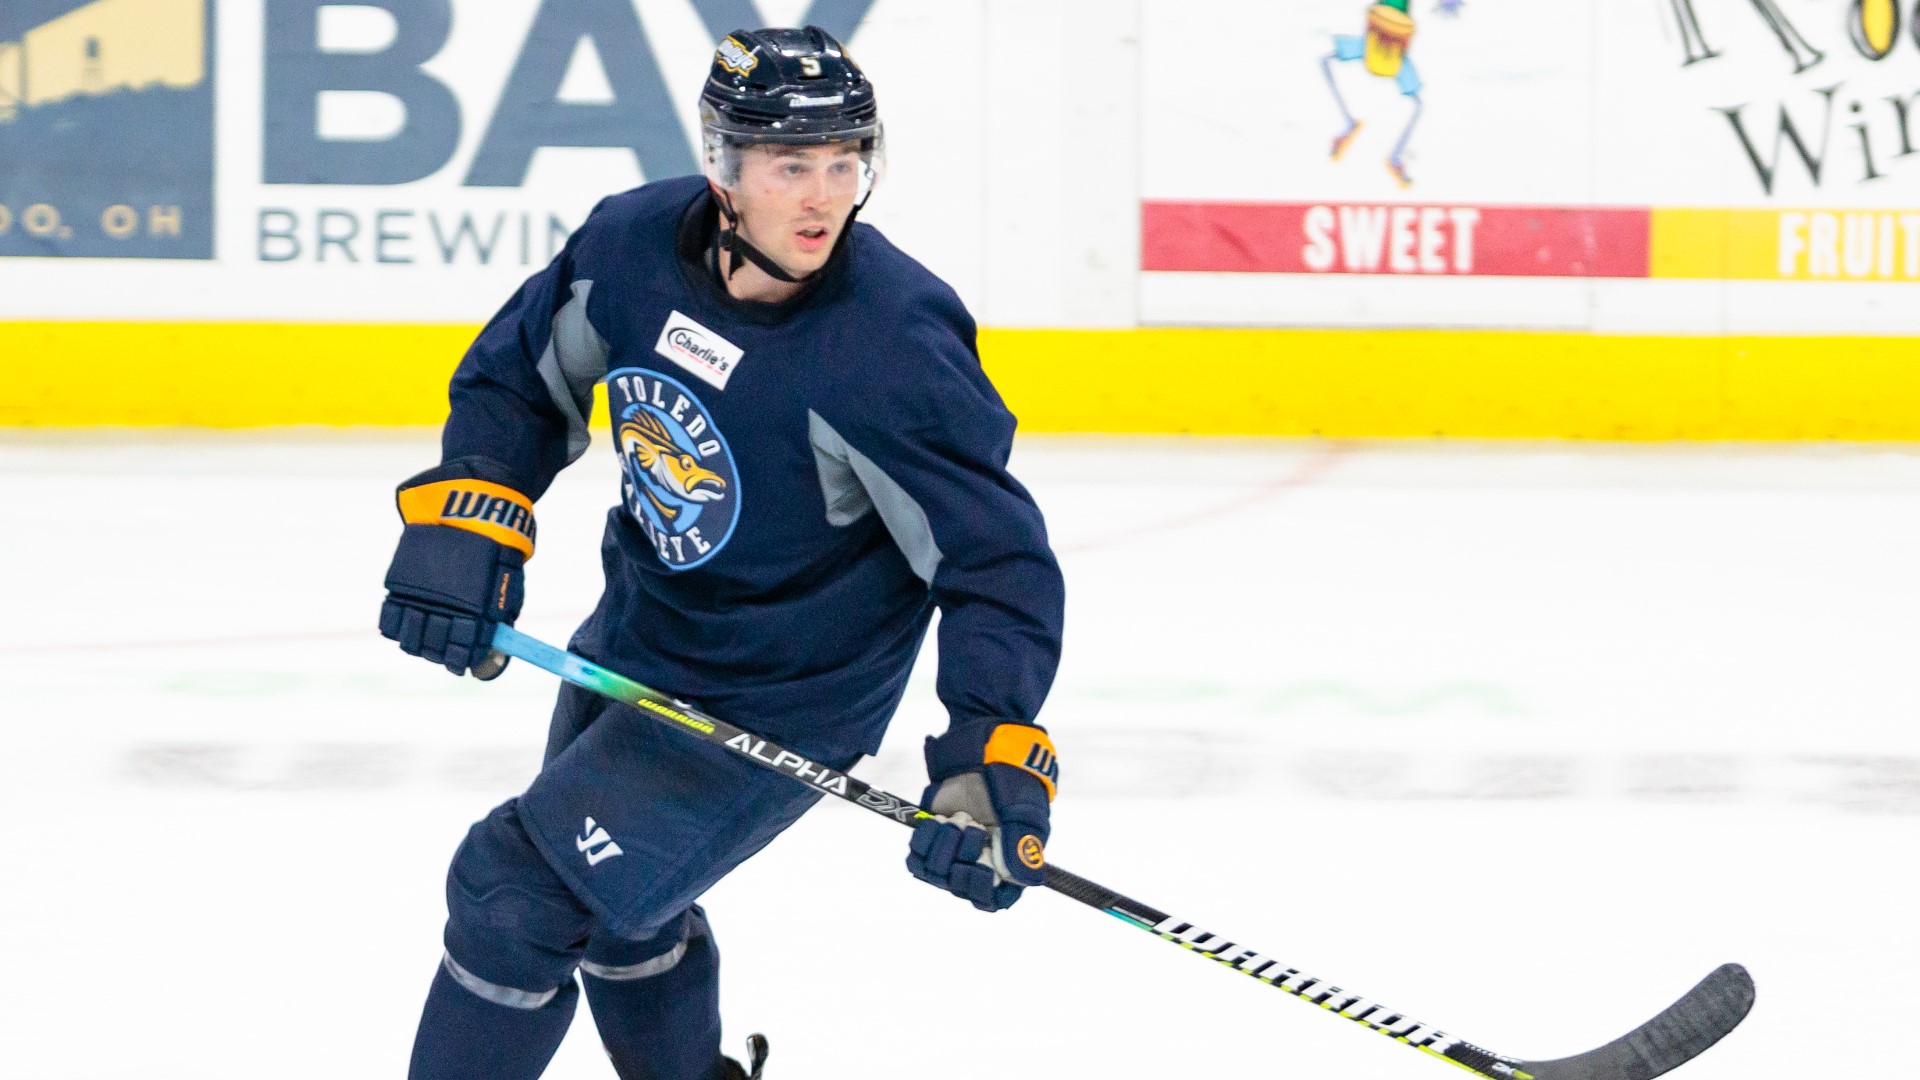 Gordi Myer was supposed to play last season for the Walleye before the season was canceled.